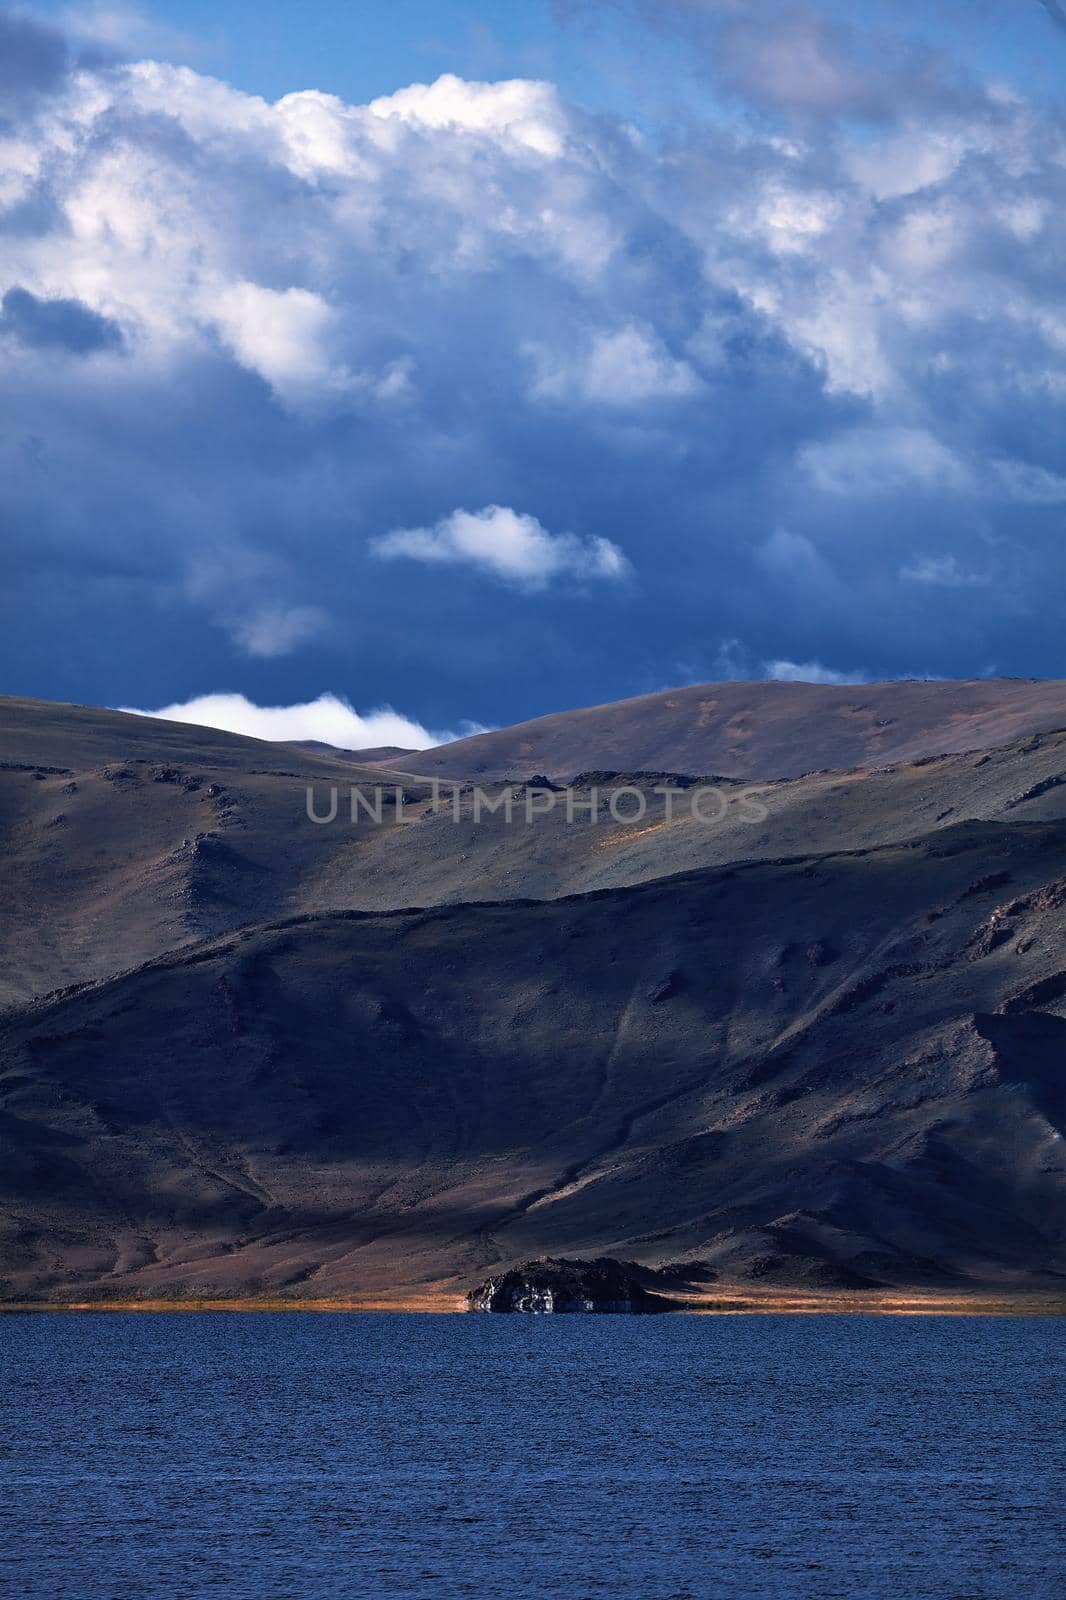 Panorama of a mountain lake. Somewhere in the vastness of Mongolia.